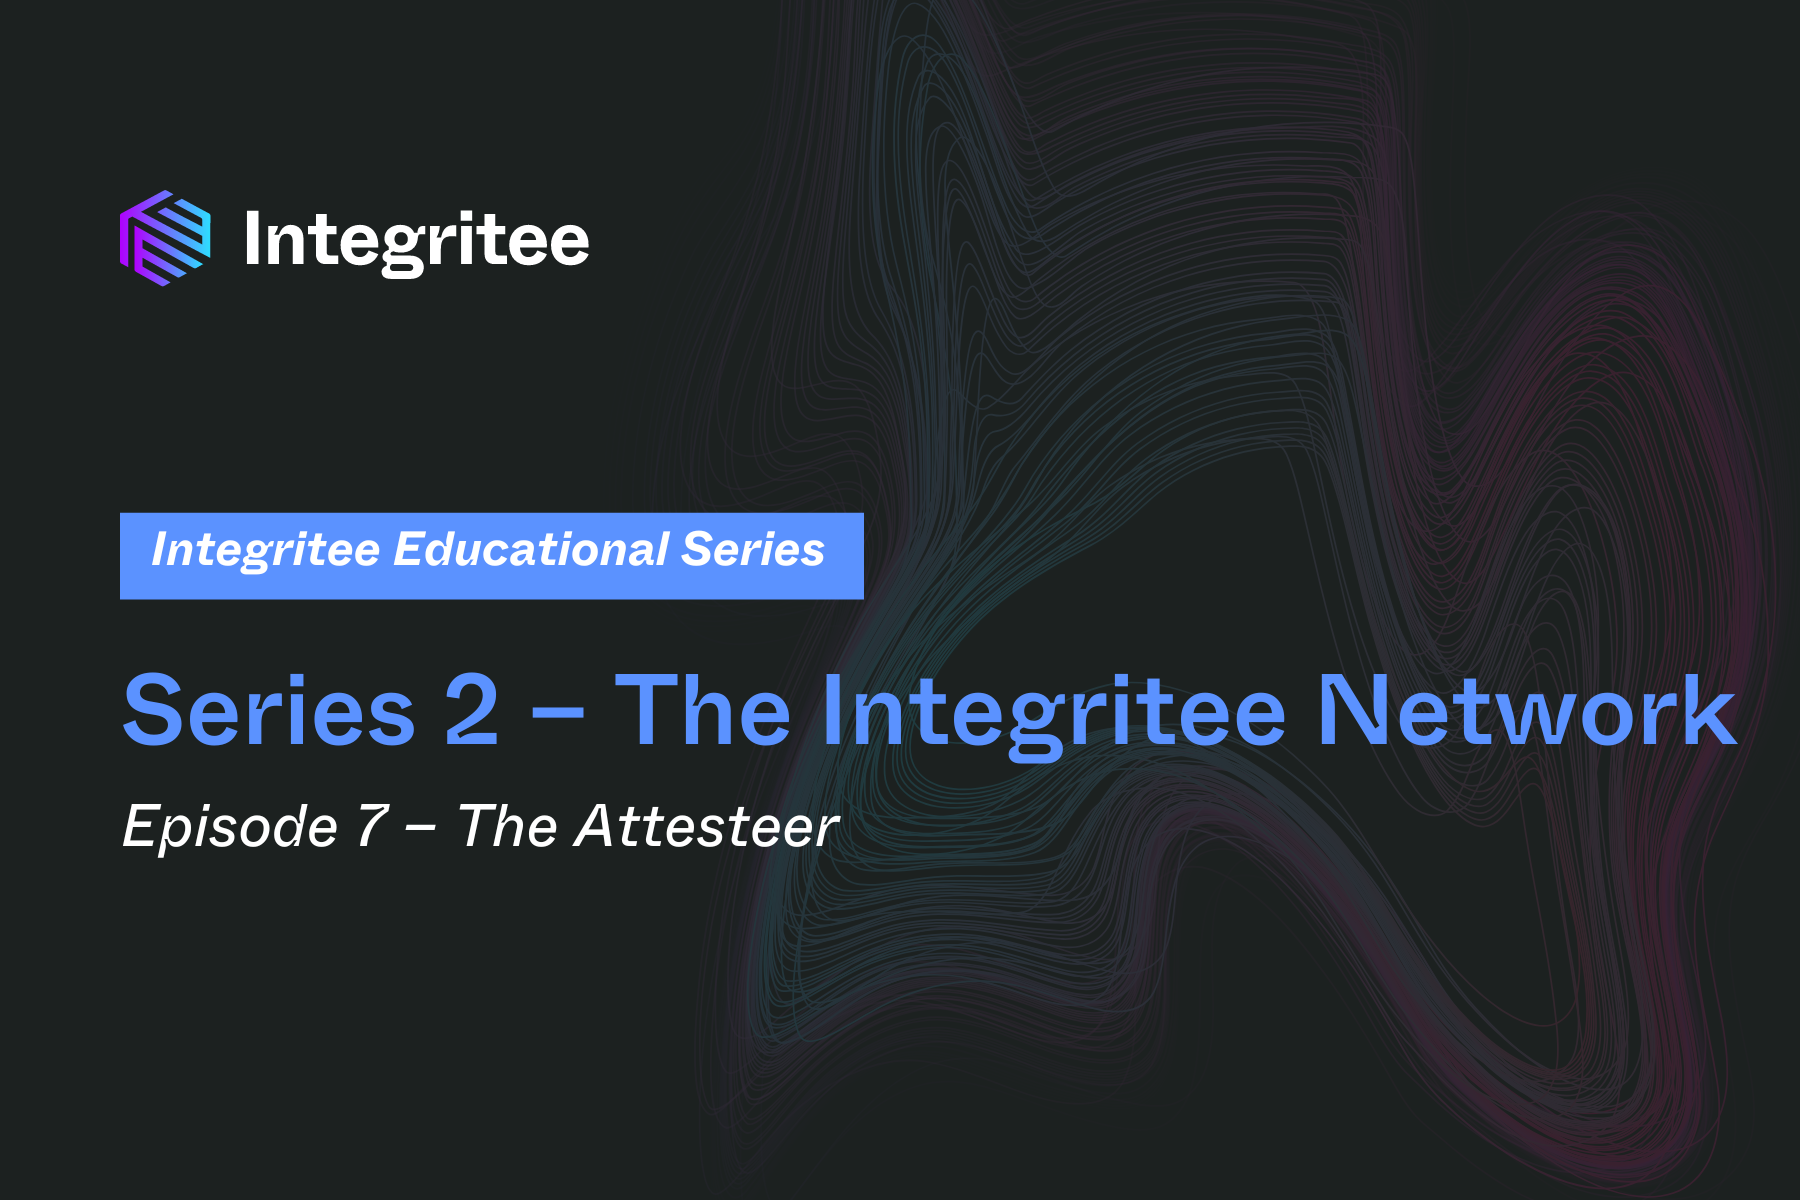 Series 2 – The Integritee Network | Episode 7 – The Attesteer